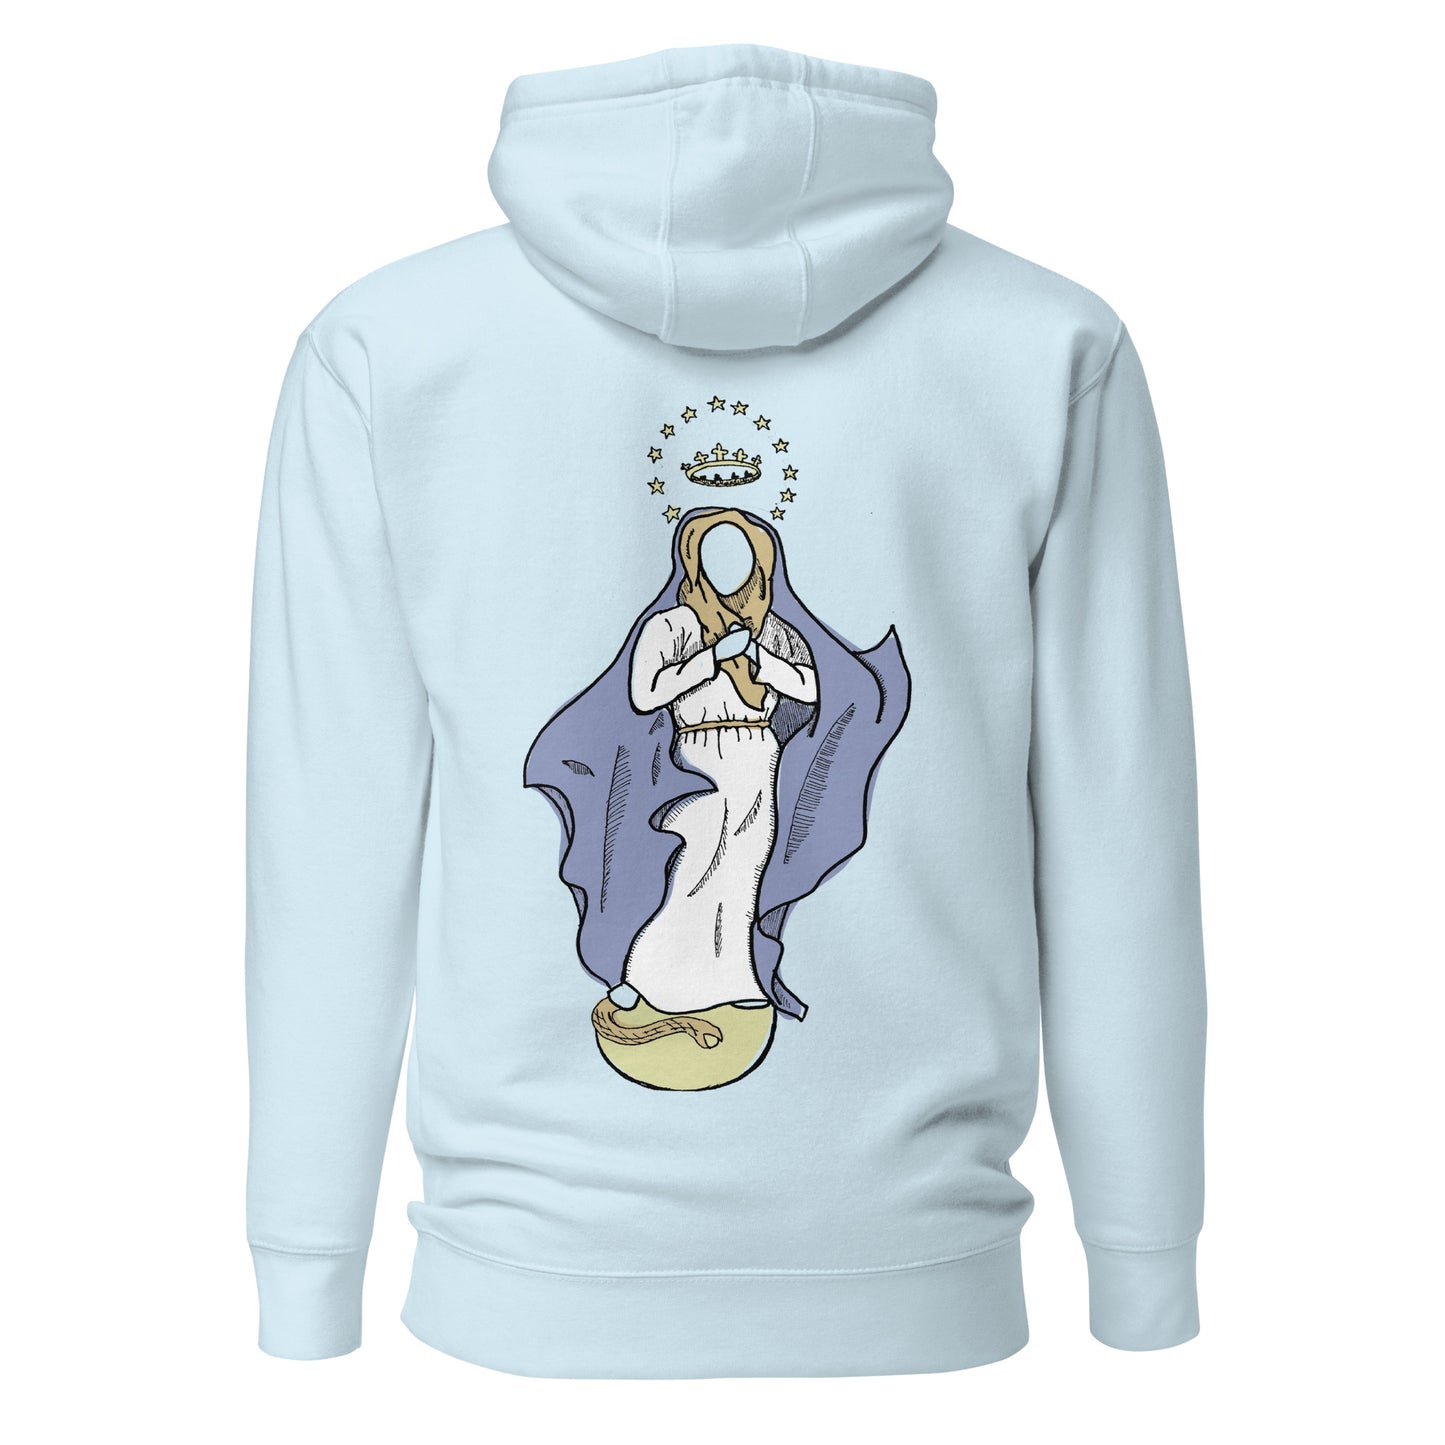 "Our Lady, Queen of Heaven" - Unisex Hoodie